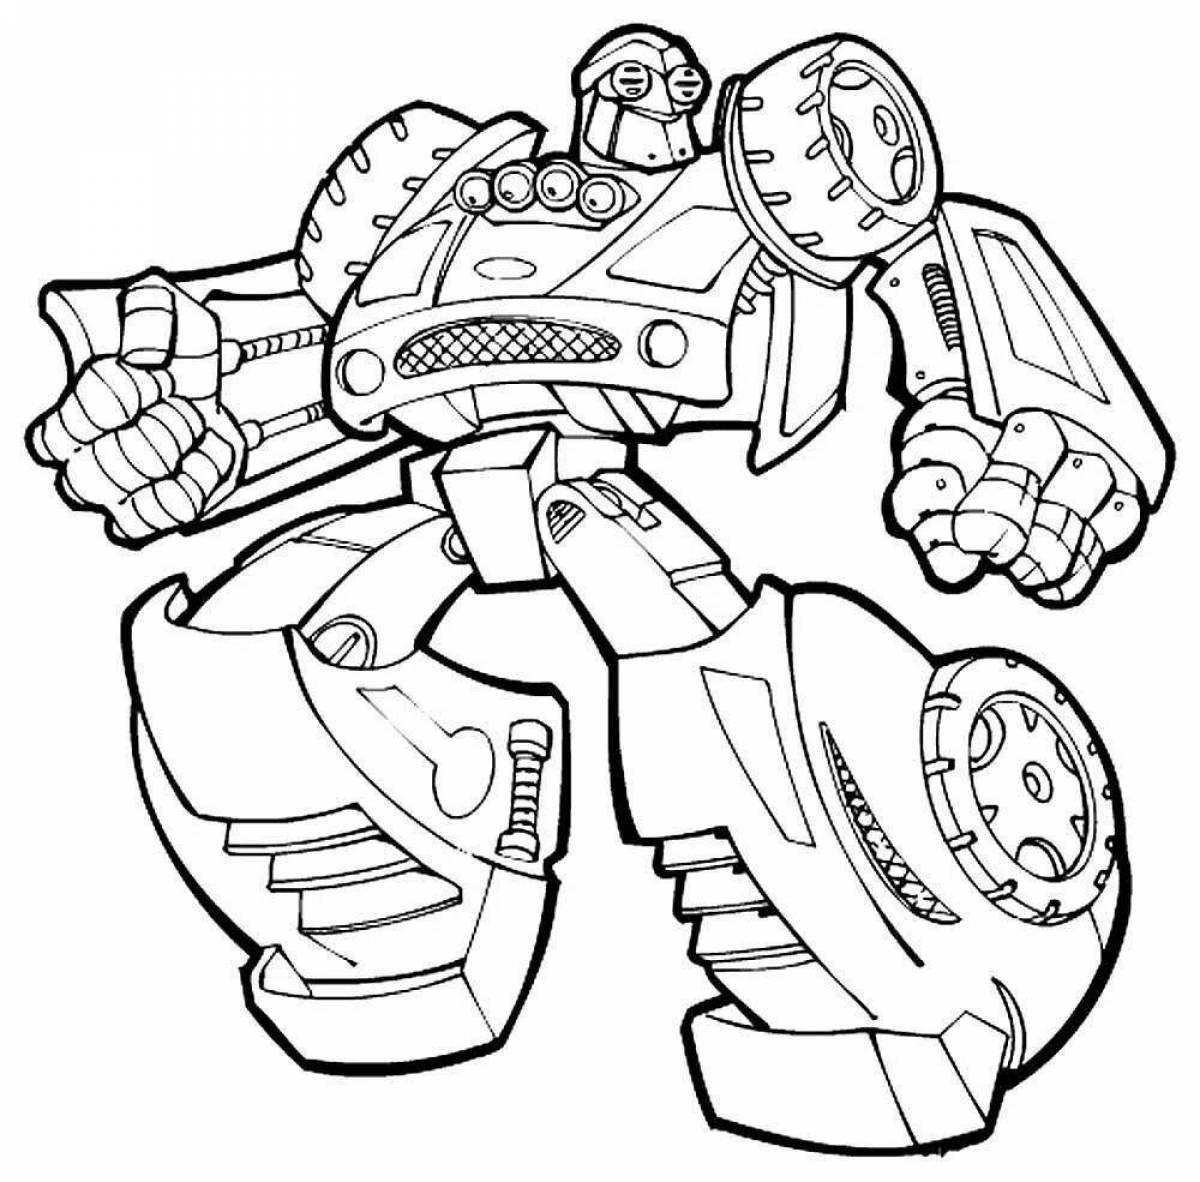 Crazy Color Transforming Robot Coloring Page for Kids